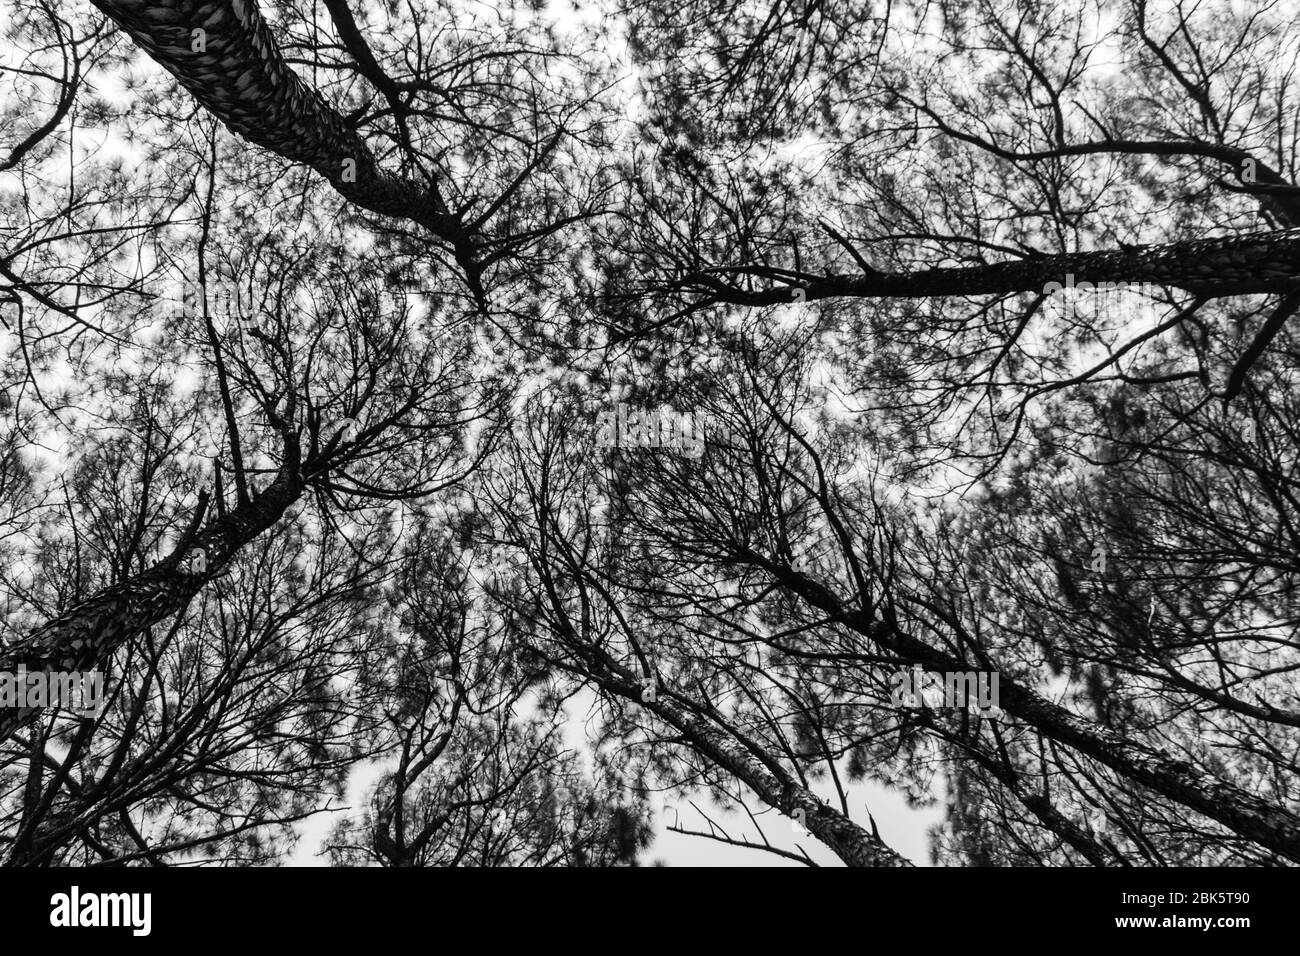 Bunch of trees from an angle downside in black and white Stock Photo